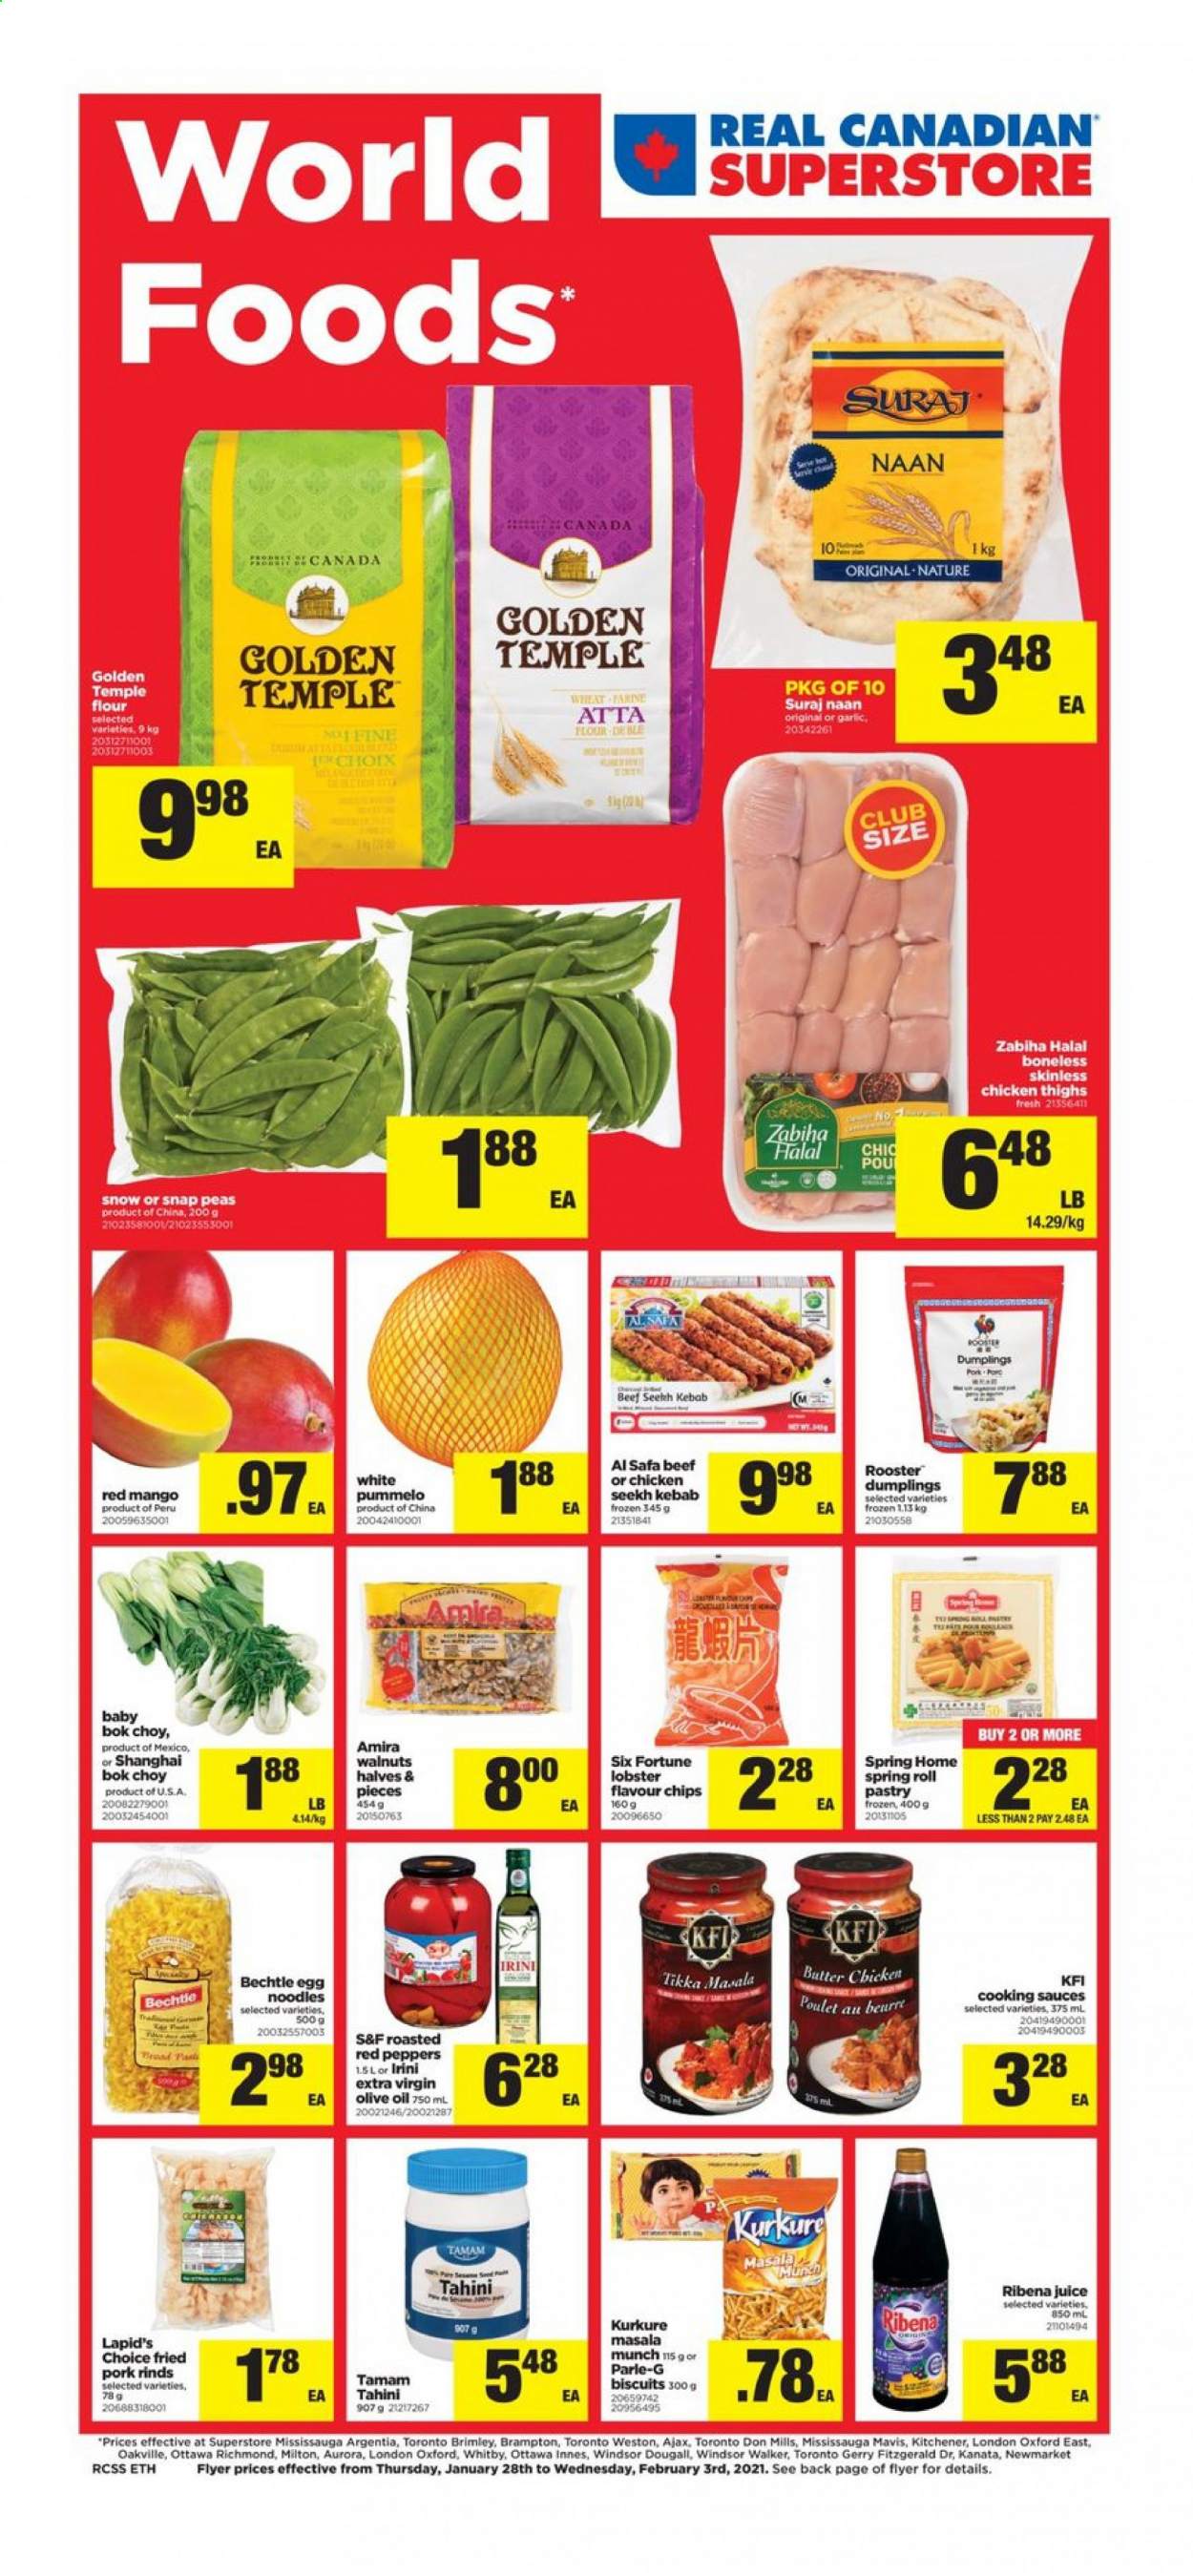 thumbnail - Real Canadian Superstore Flyer - January 28, 2021 - February 03, 2021 - Sales products - bok choy, garlic, peas, peppers, red peppers, mango, lobster, dumplings, noodles, Tikka Masala, snap peas, biscuit, Parle, flour, egg noodles, tahini, extra virgin olive oil, olive oil, oil, walnuts, juice, chicken thighs, chicken, Ajax. Page 1.